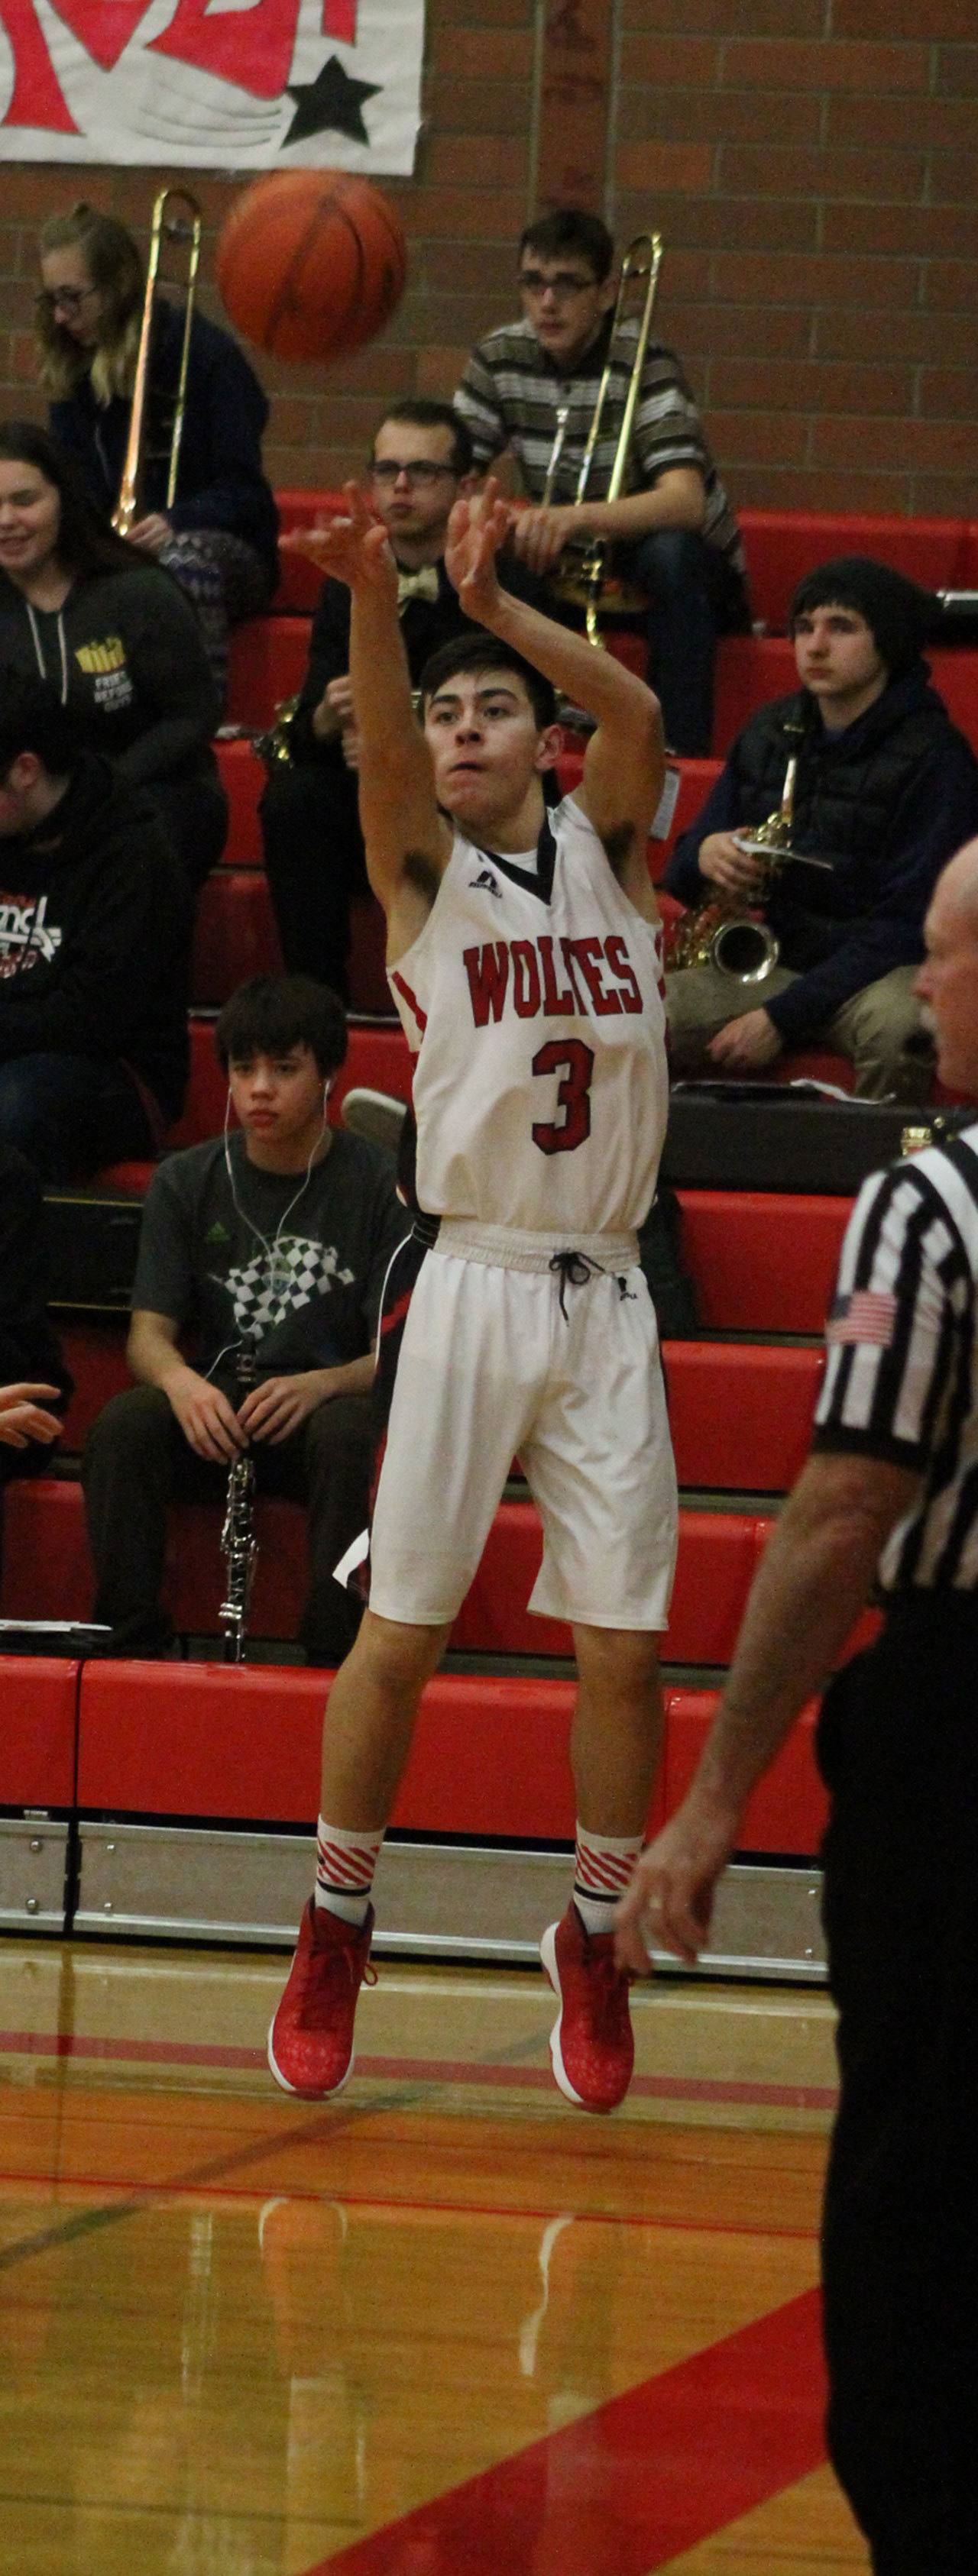 Hunter Smith fires up a shot in the Wolves’ win over Klahowya Dec. 13. His efforts in the game earned him WIAA Athlete of the Week honors. (Photo by Jim Waller)